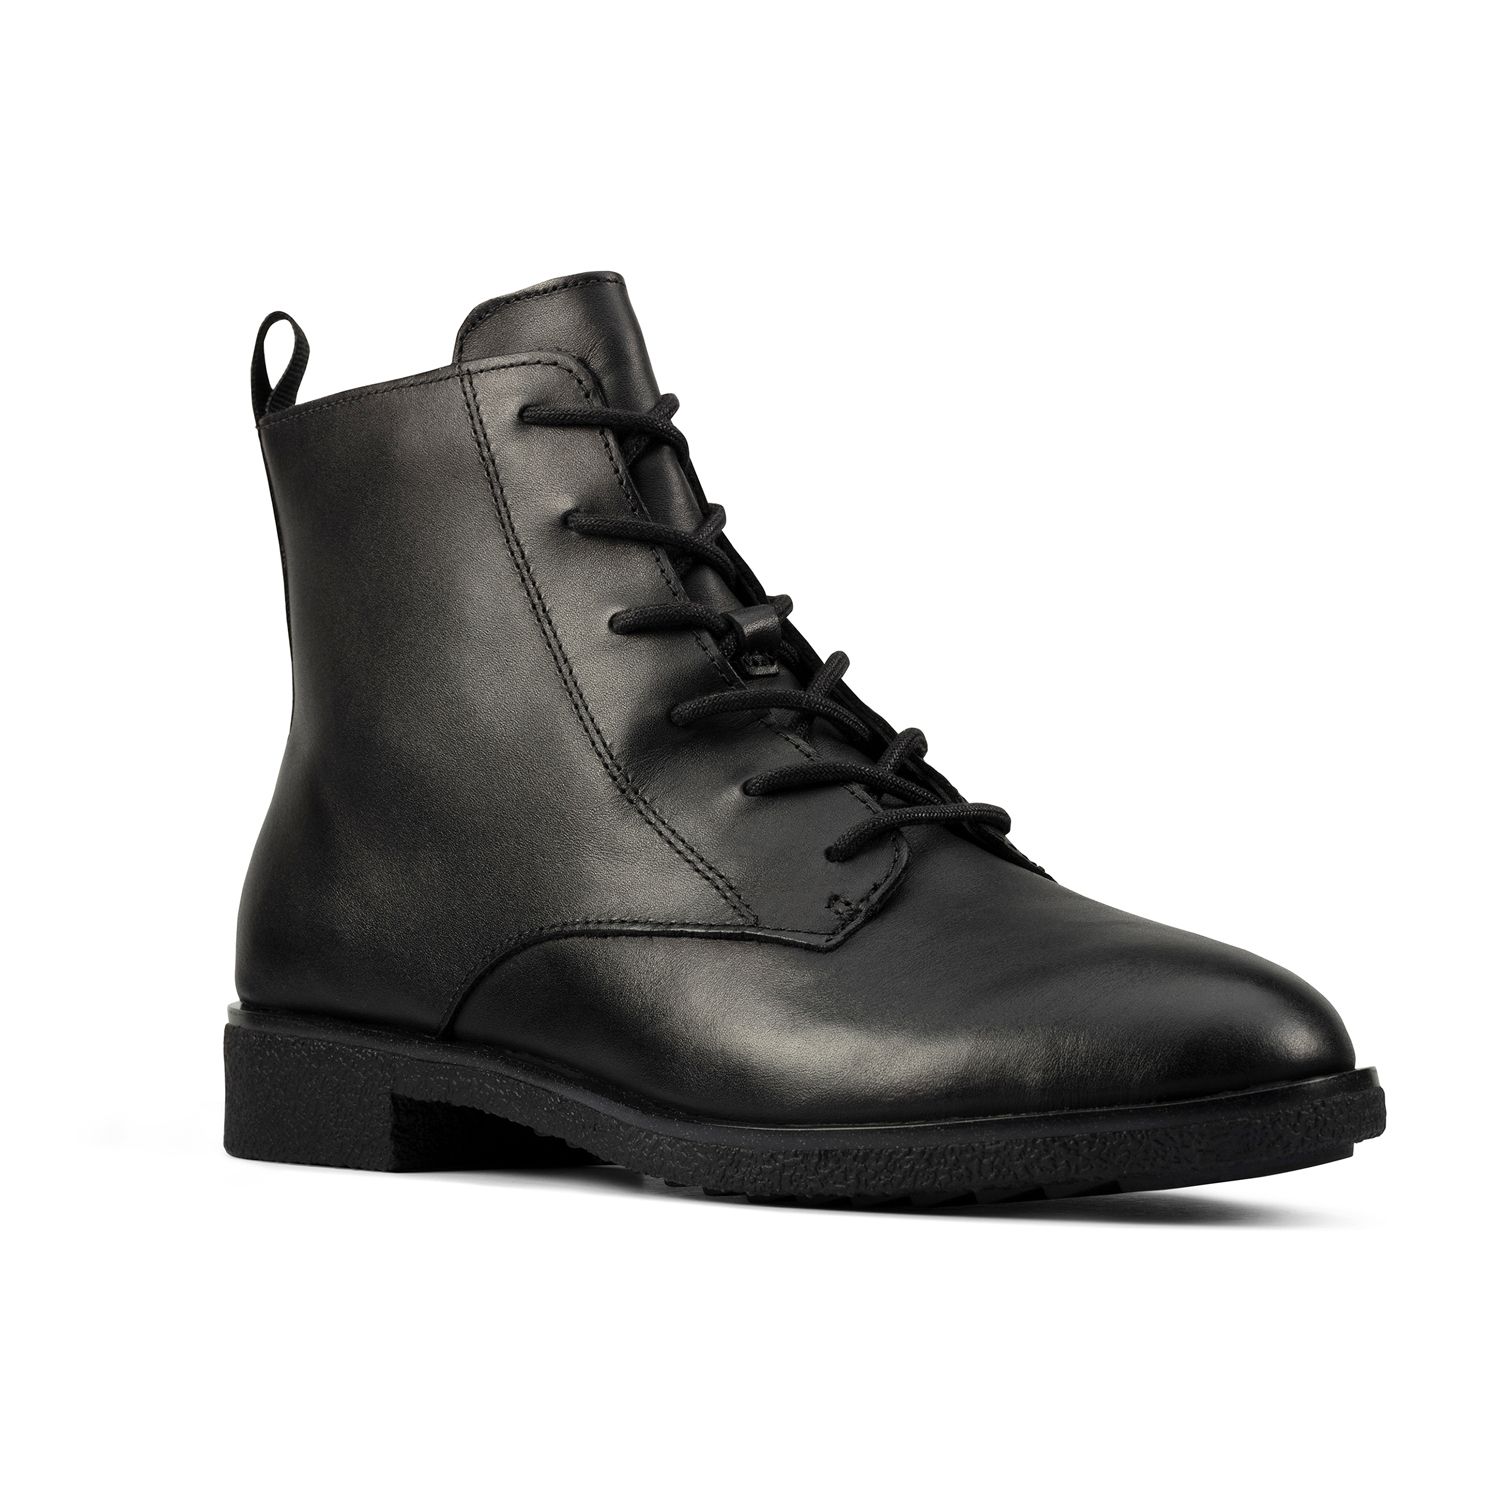 Griffin Lace Women's Lace-up Ankle Boots